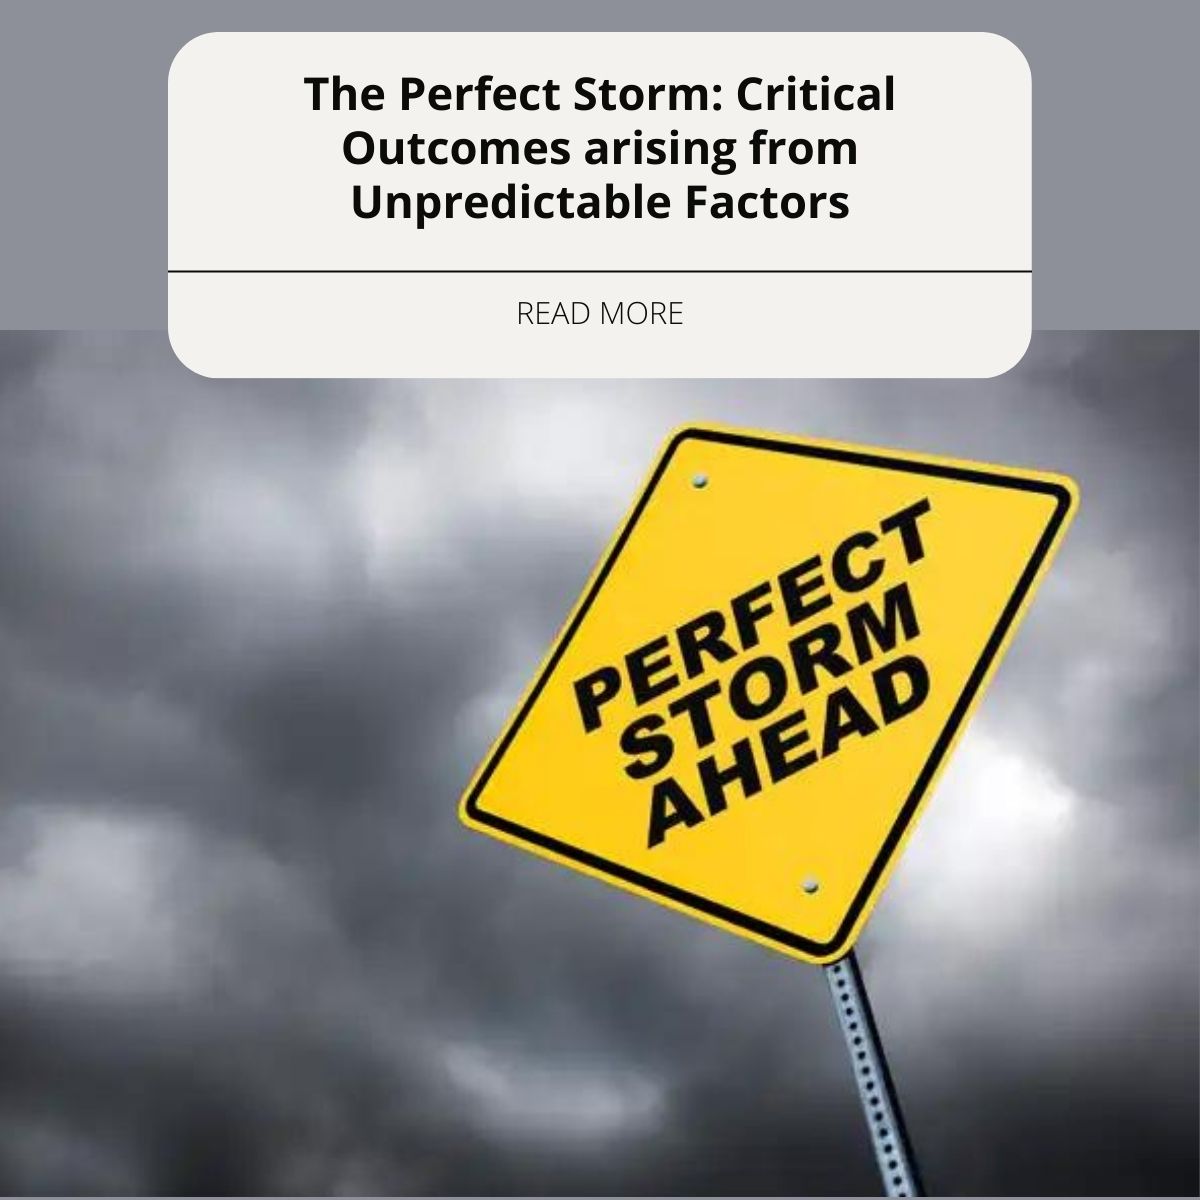 The Perfect Storm: Critical Outcomes arising from Unpredictable Factors